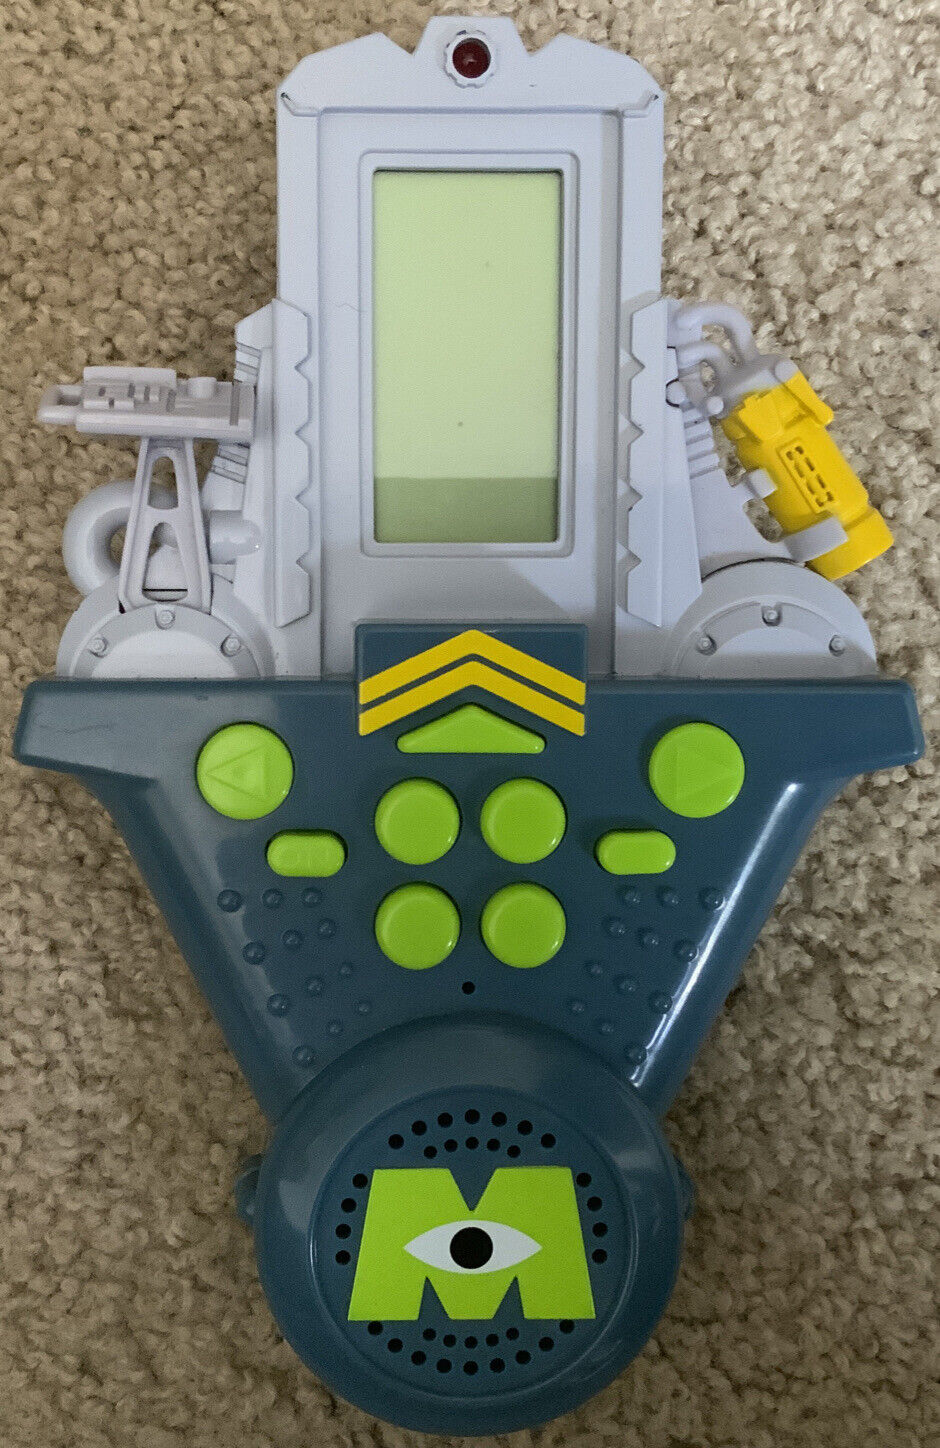 Disney's Monsters Inc Scare Station Game (hasbro, 2001) Works